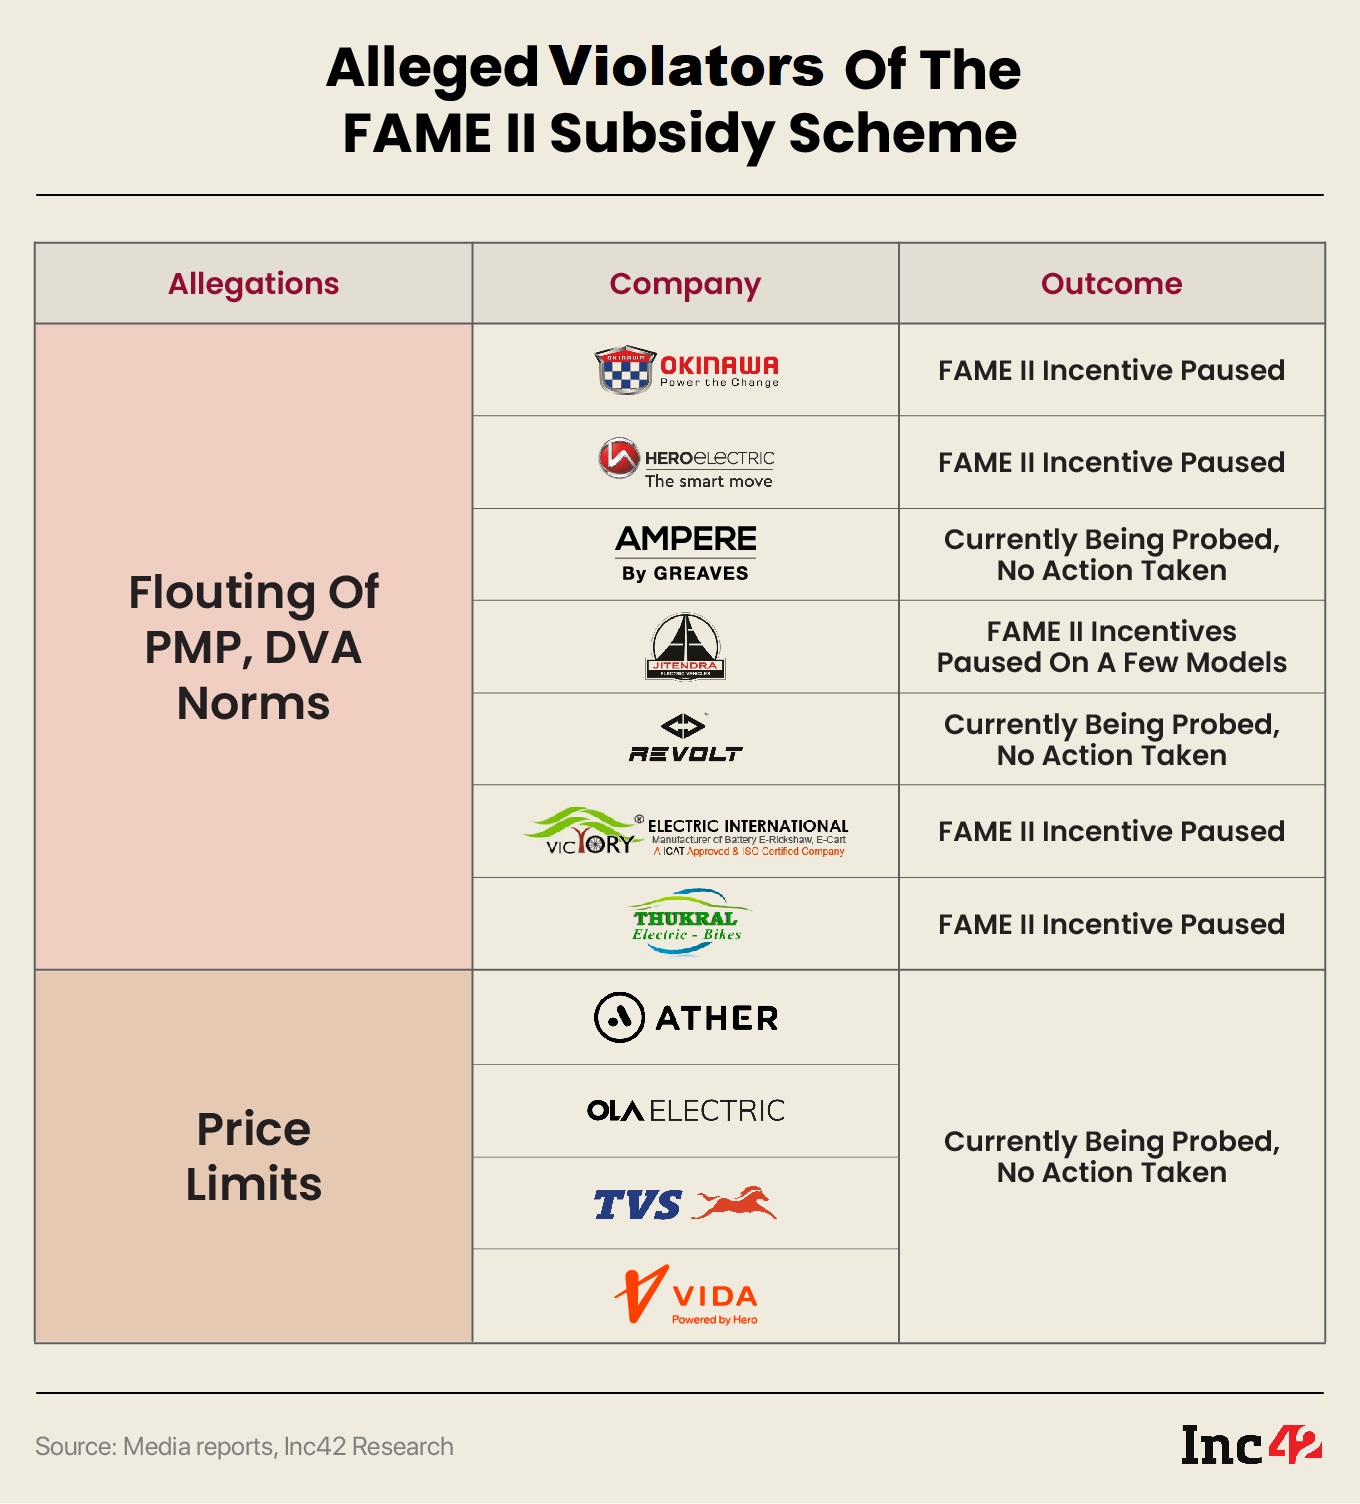 Alleged Violators of the FAME II Subsidy Scheme